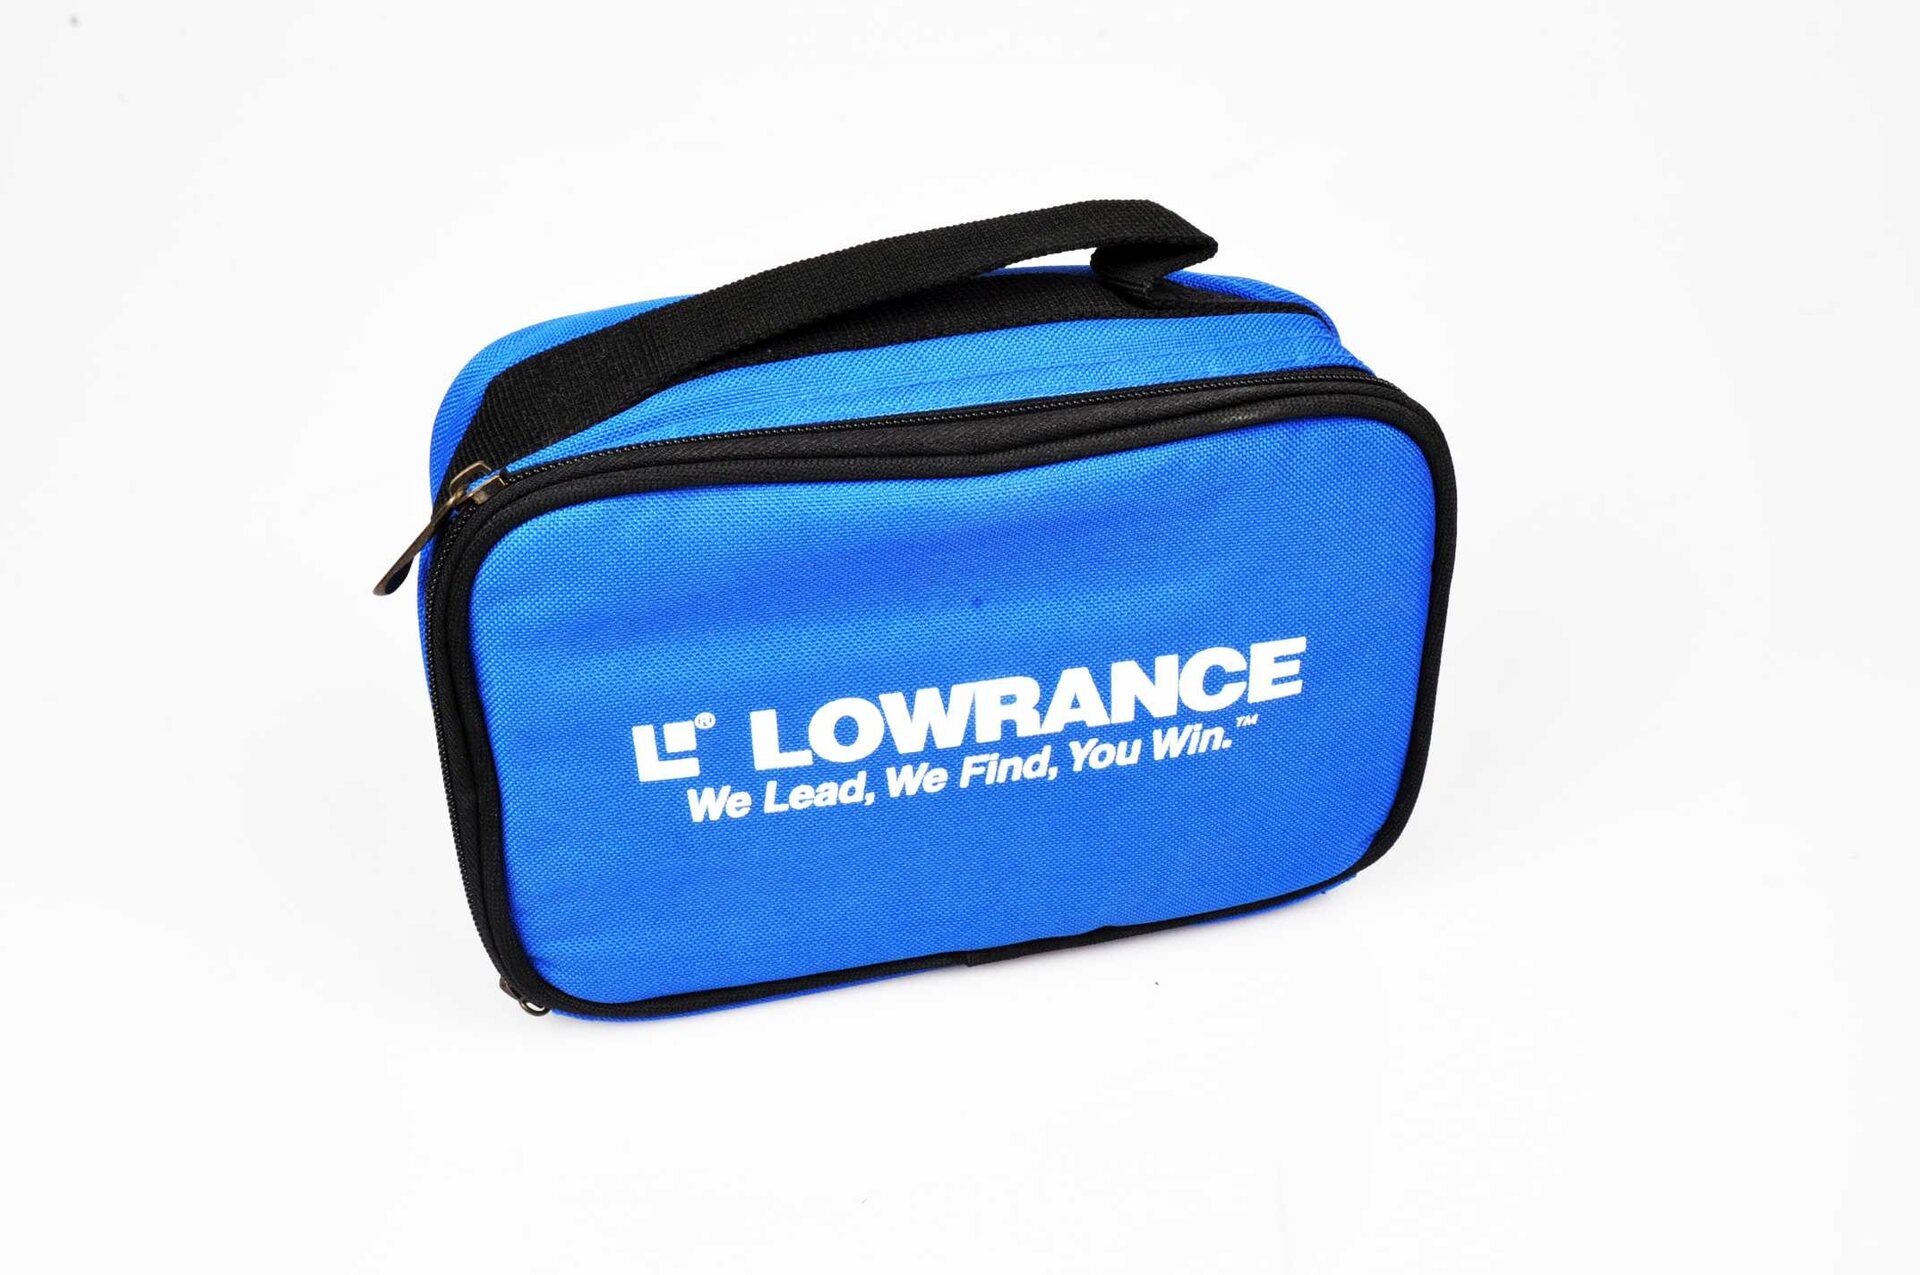 Lowrance Cover bag for fish finder